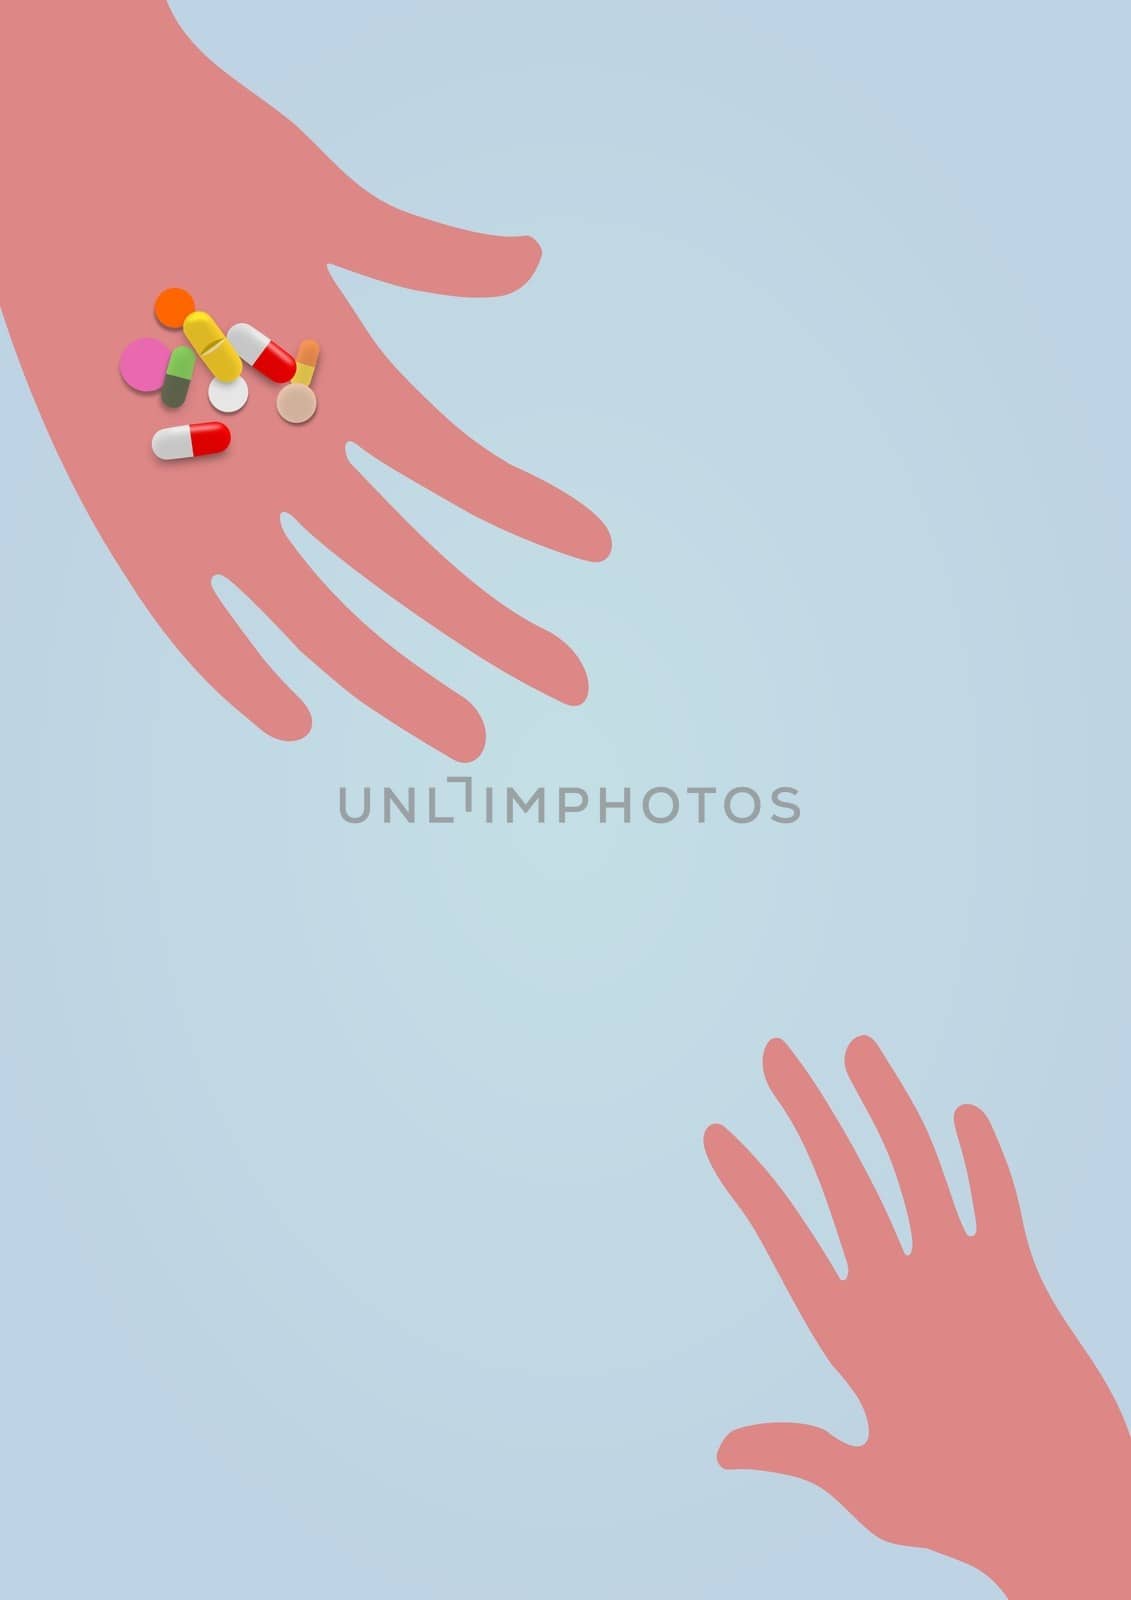 Illustration of two hands with one holding drugs and handing them out to a child